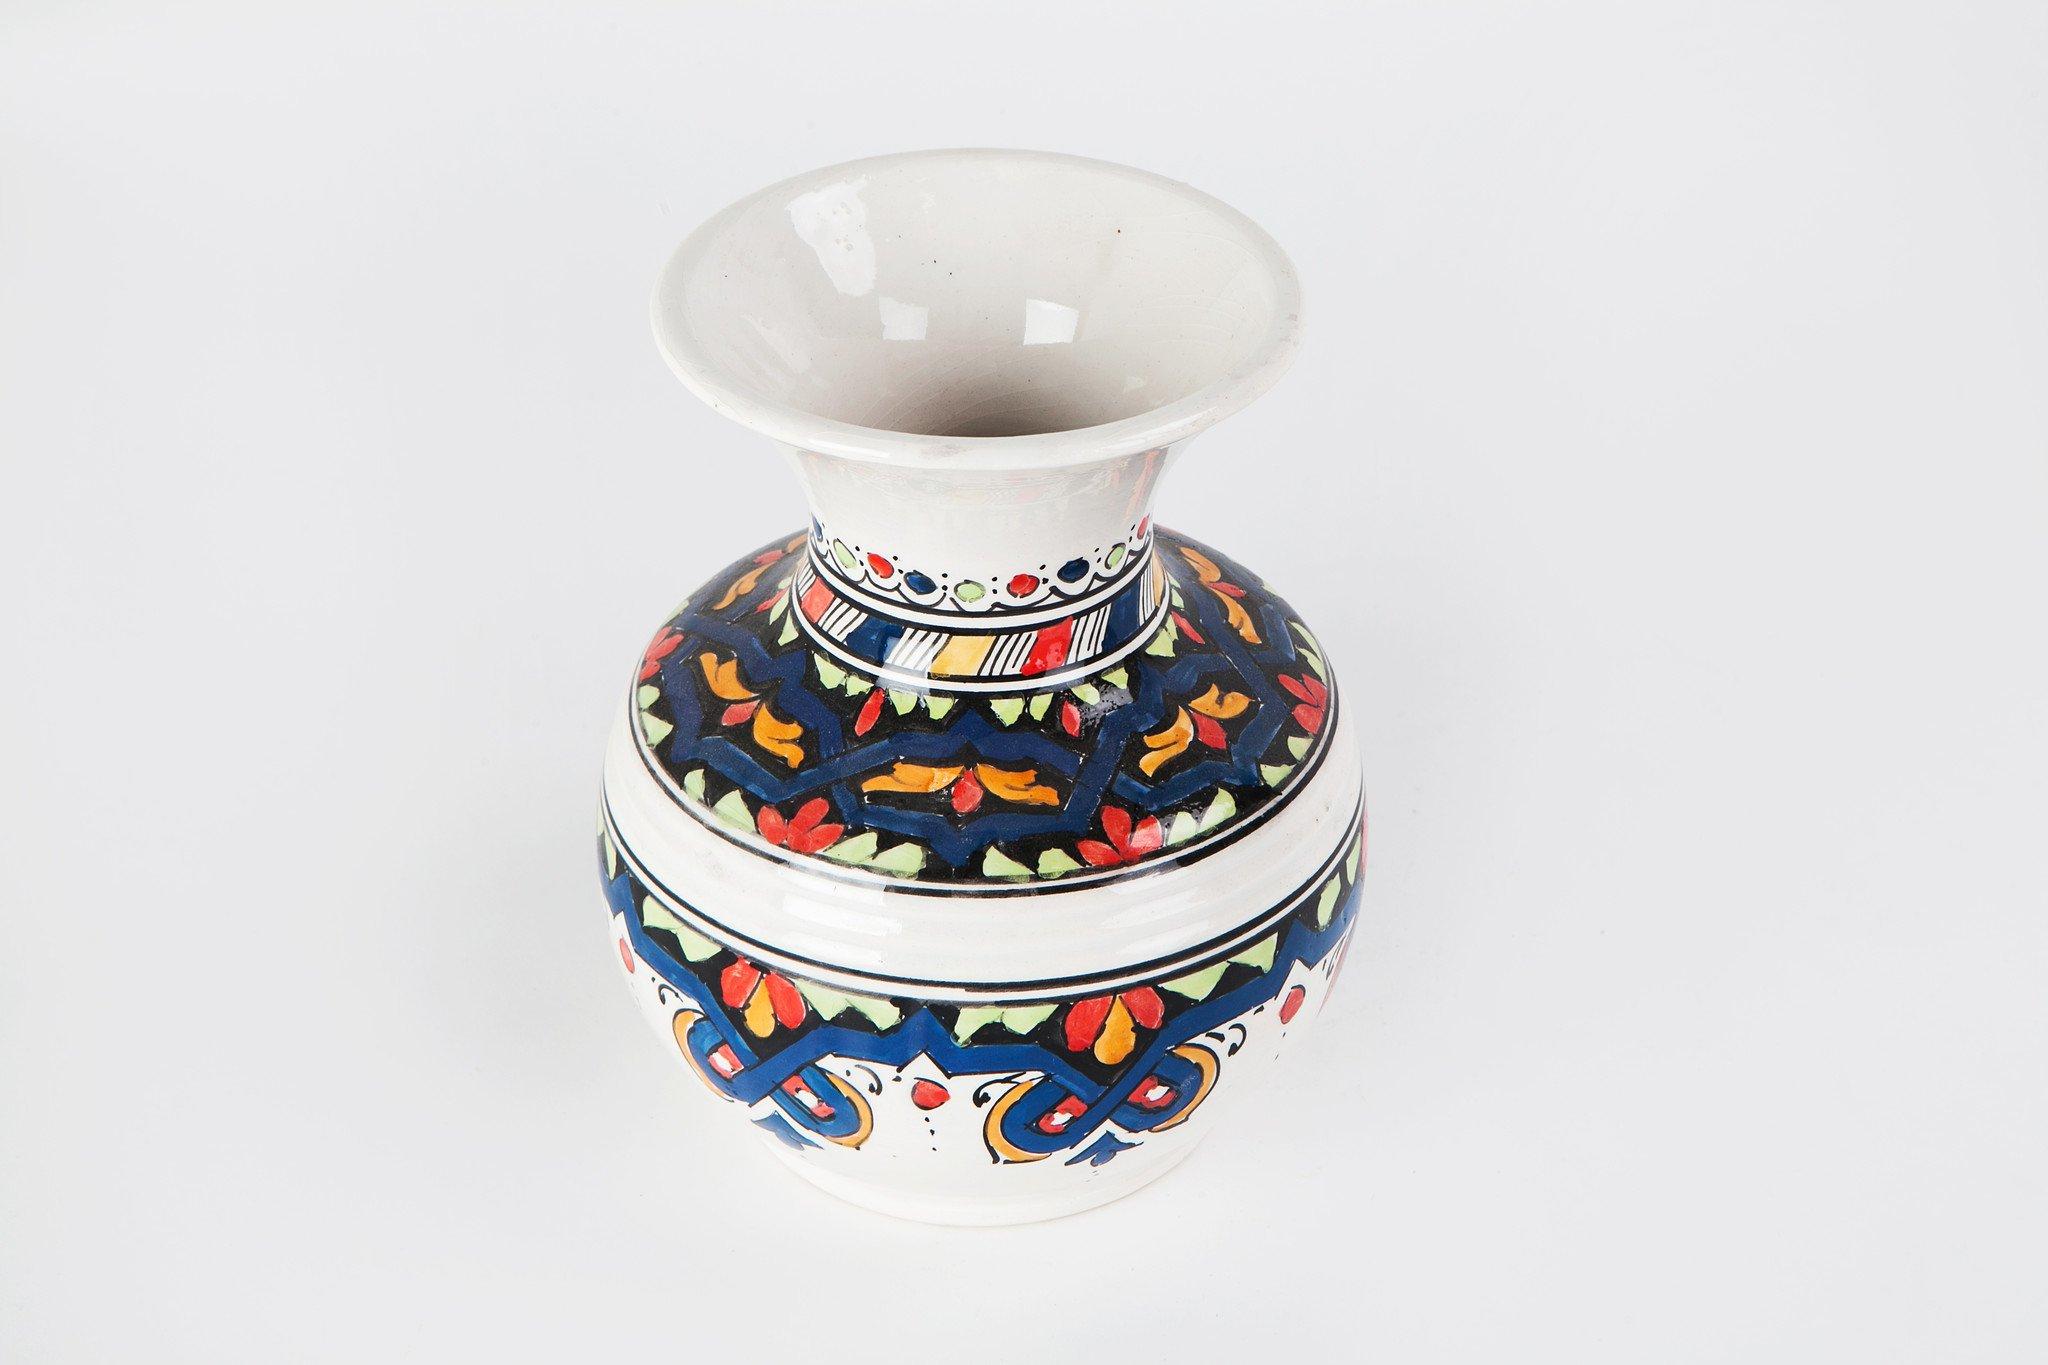 Featuring wonderfully intricate and lyrical hand painted designs, this bright, colorful ceramic vase provides a touch of exotic sophistication and soothing tranquility that will elevate the style of any room. It has been created by master artisans